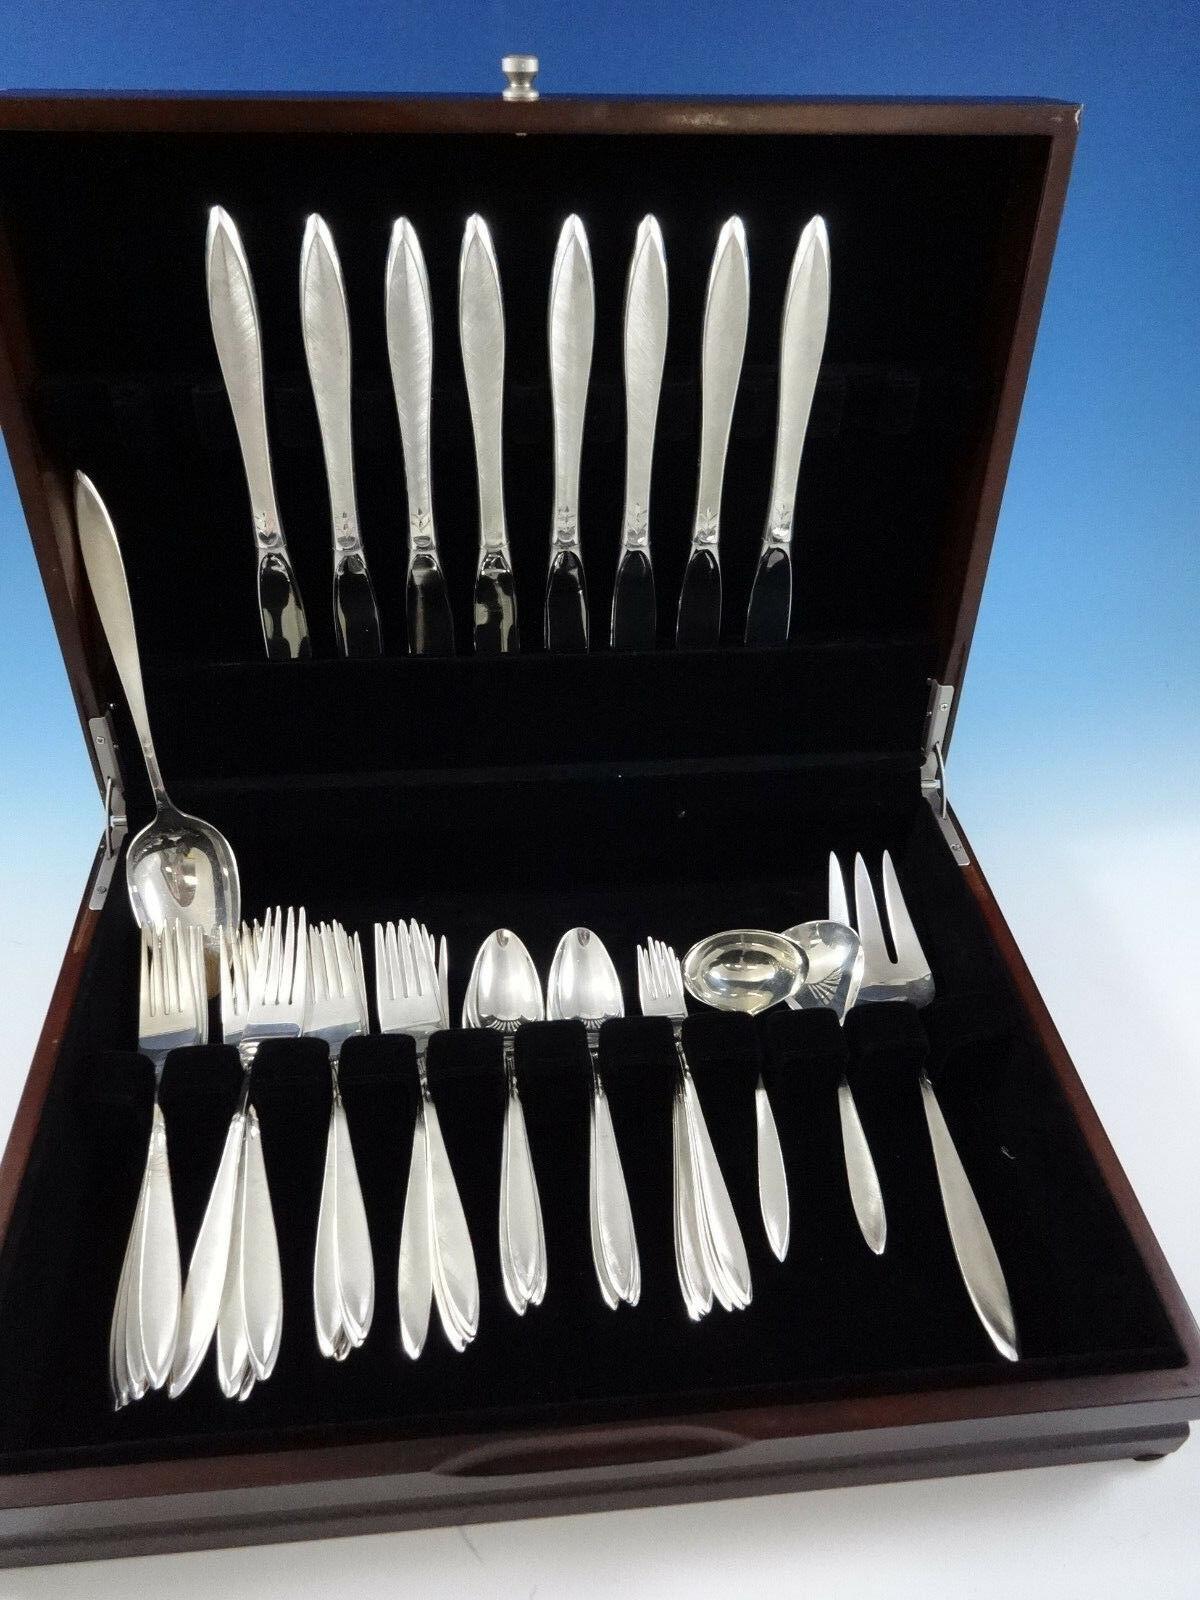 Simple and modern Gossamer by Gorham Sterling Silver flatware set, 44 pieces. This pattern has a beautiful brushed matte finish on the handles. This set includes:

8 knives, 8 7/8